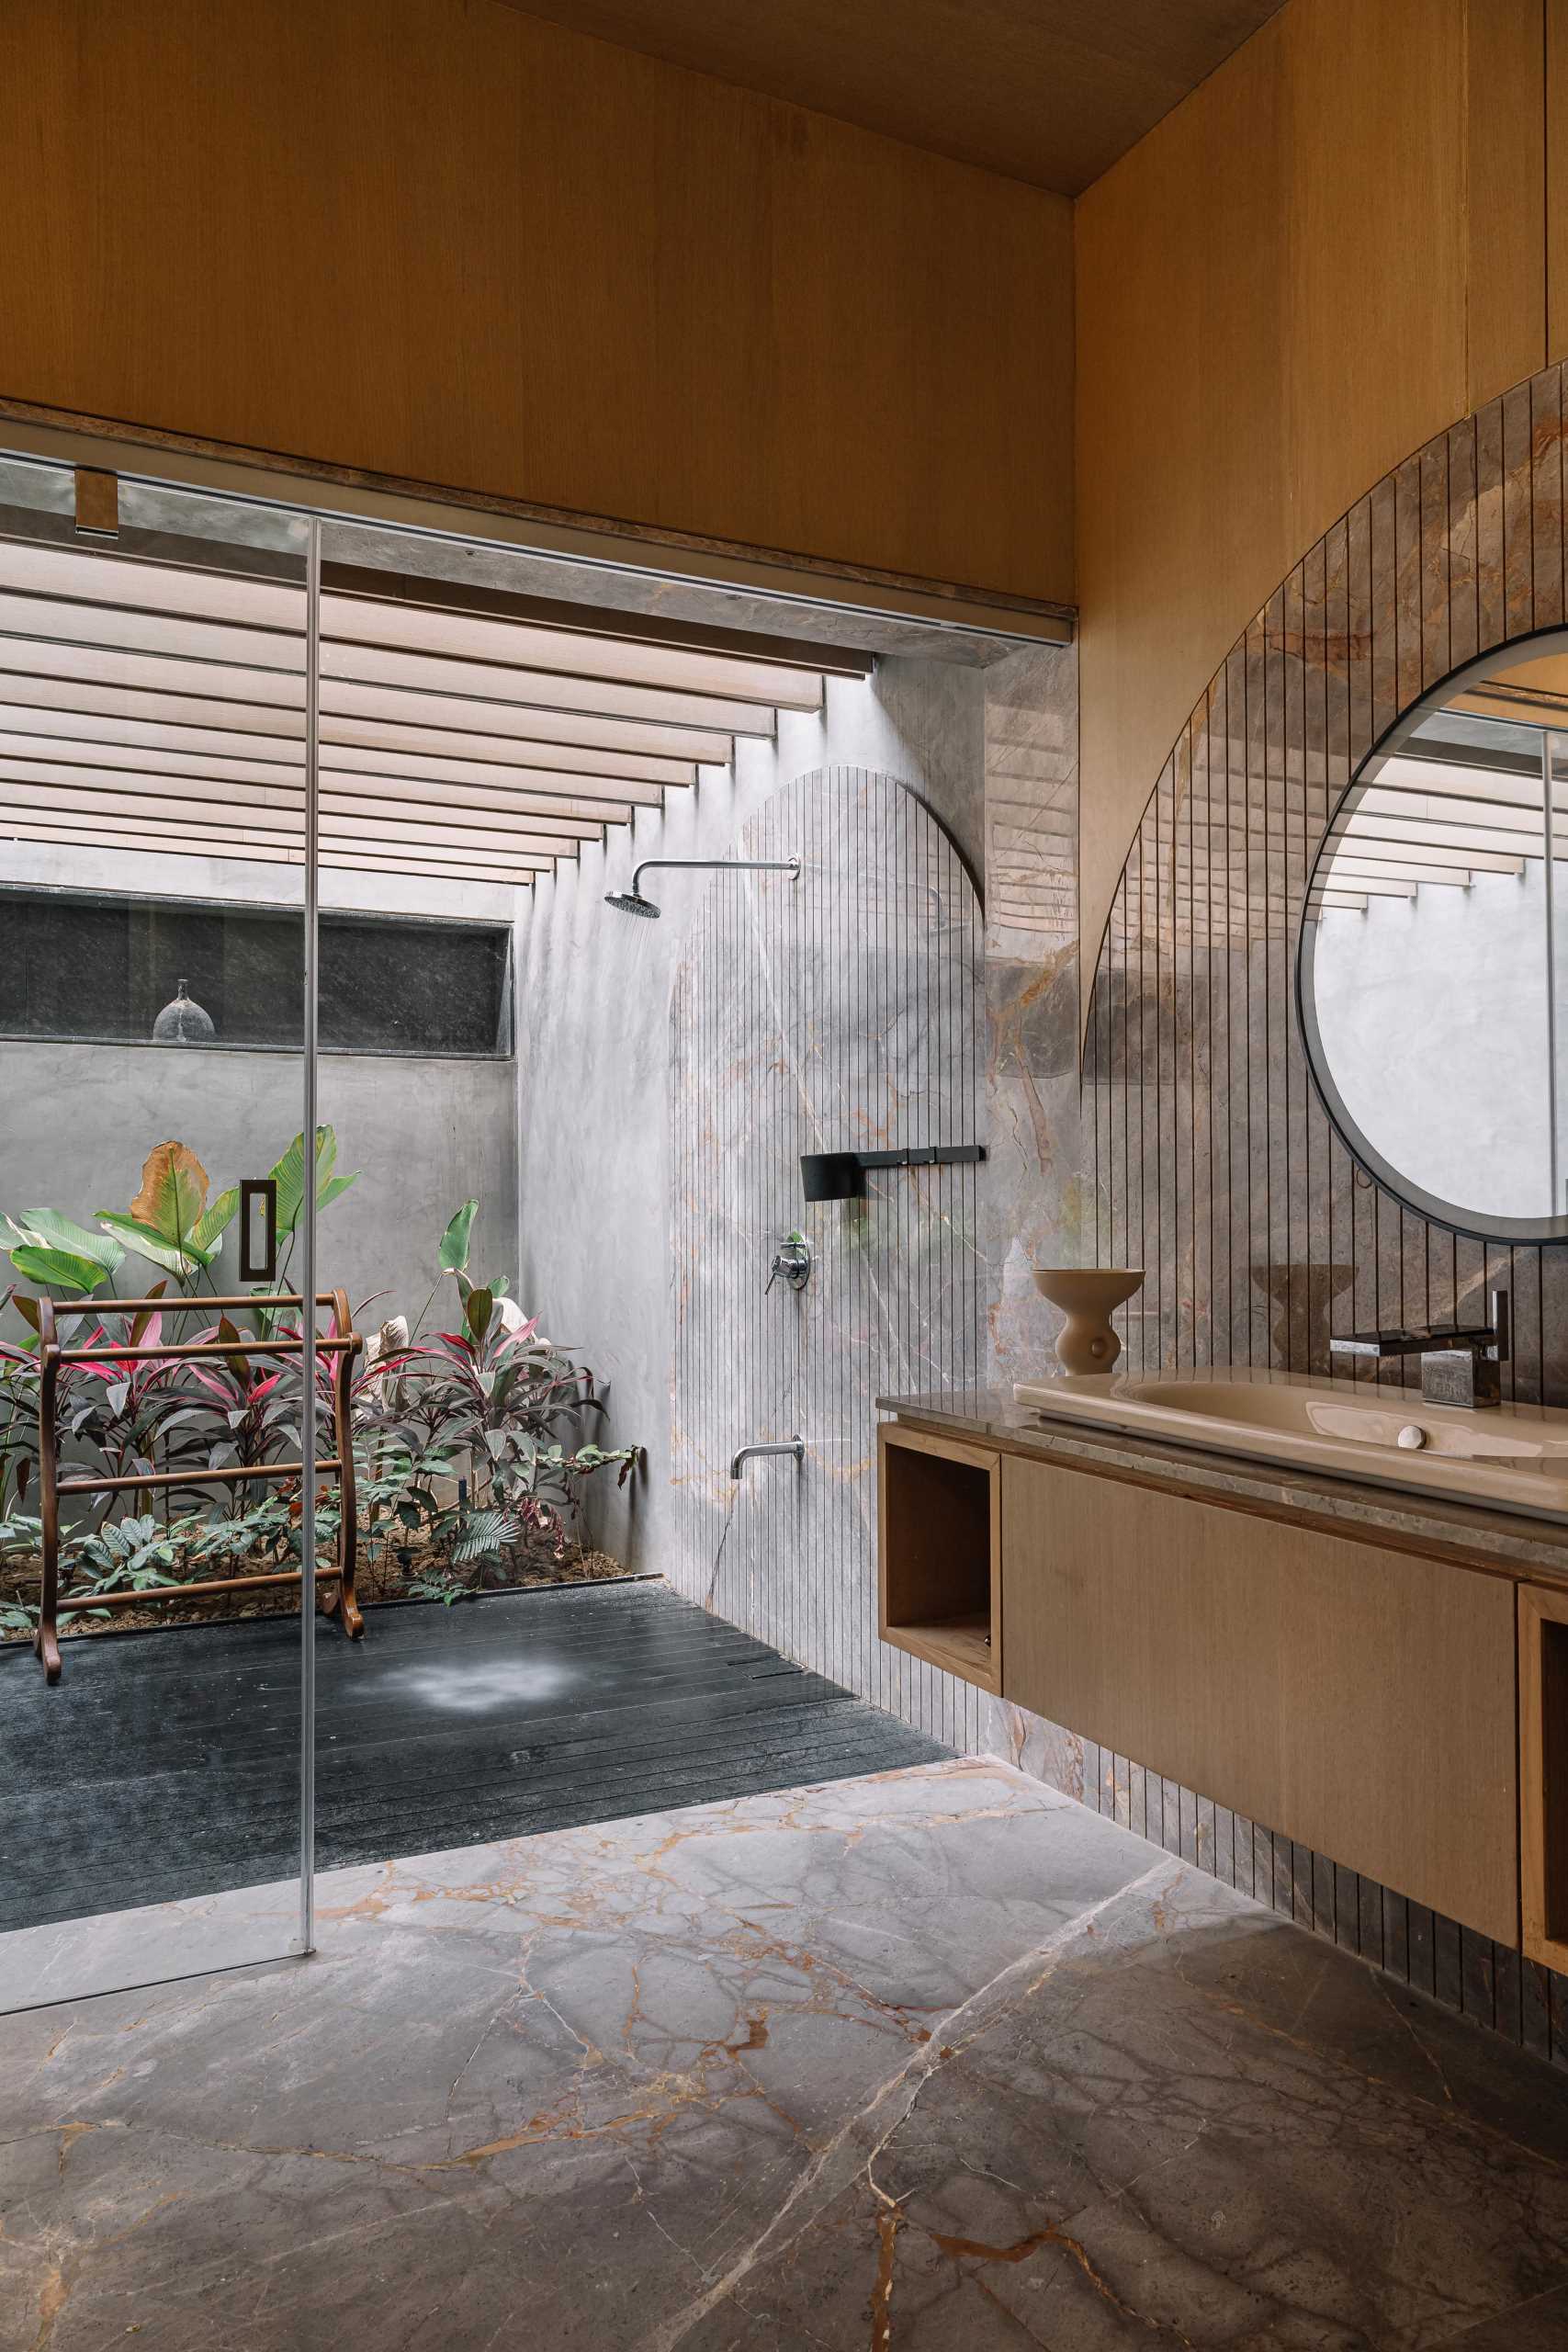 A modern bathroom with a private outdoor s،wer.